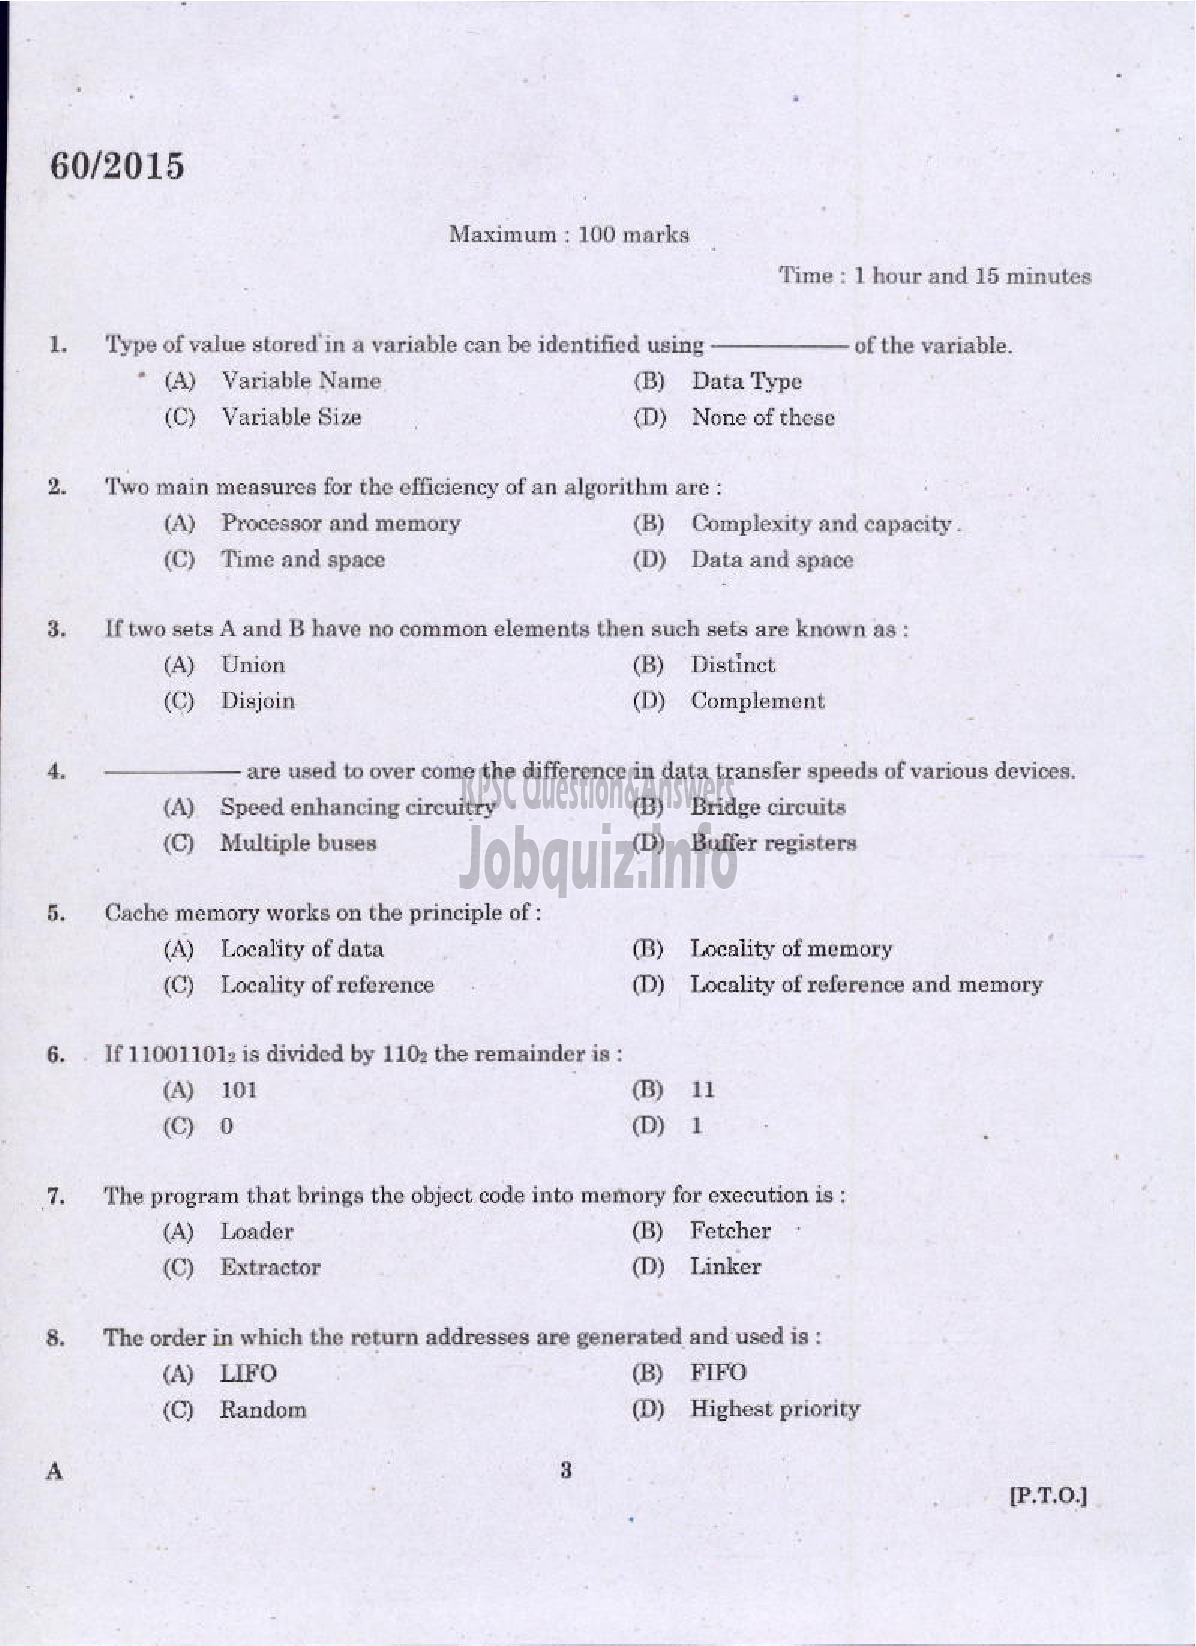 Kerala PSC Question Paper - COMPUTER PROGRAMMER TECHNICAL EDUCATION ENGINEERING COLLEGES-1